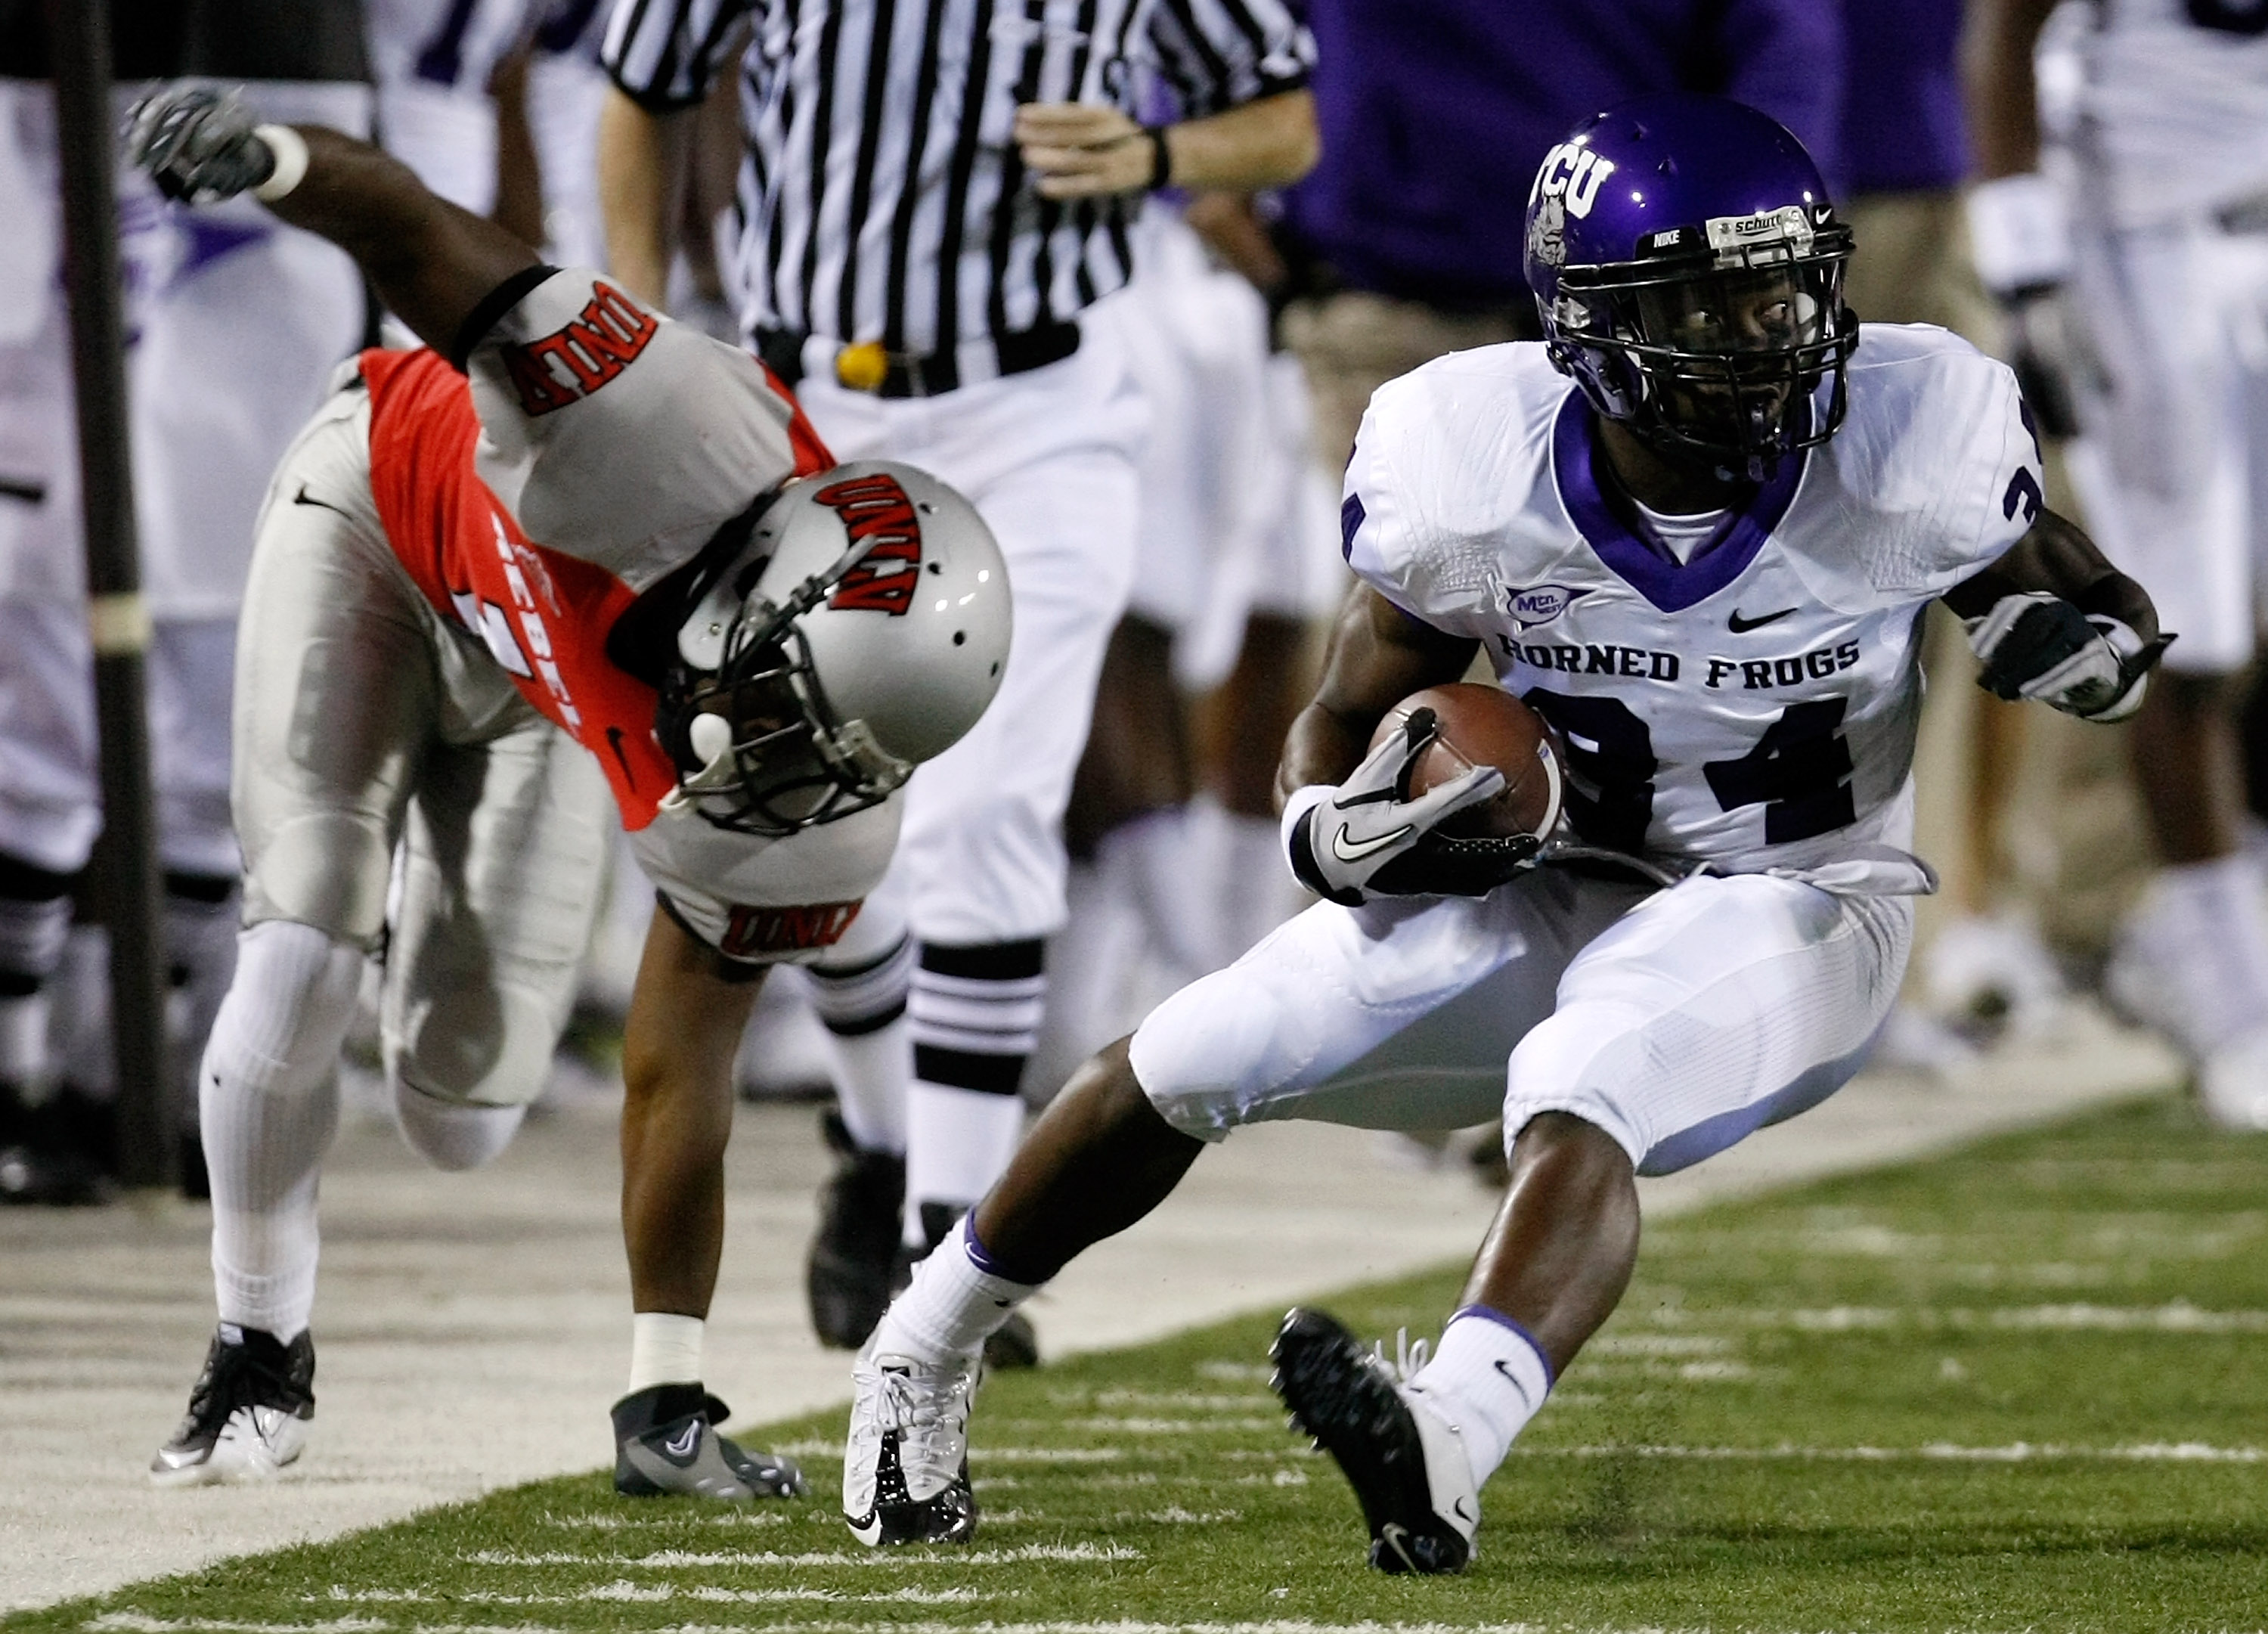 LAS VEGAS - OCTOBER 30:  Ed Wesley #34 of the Texas Christian University Horned Frogs runs for yardage after getting away from Will Chandler #1 of the UNLV Rebels during the first quarter of their game at Sam Boyd Stadium October 30, 2010 in Las Vegas, Ne